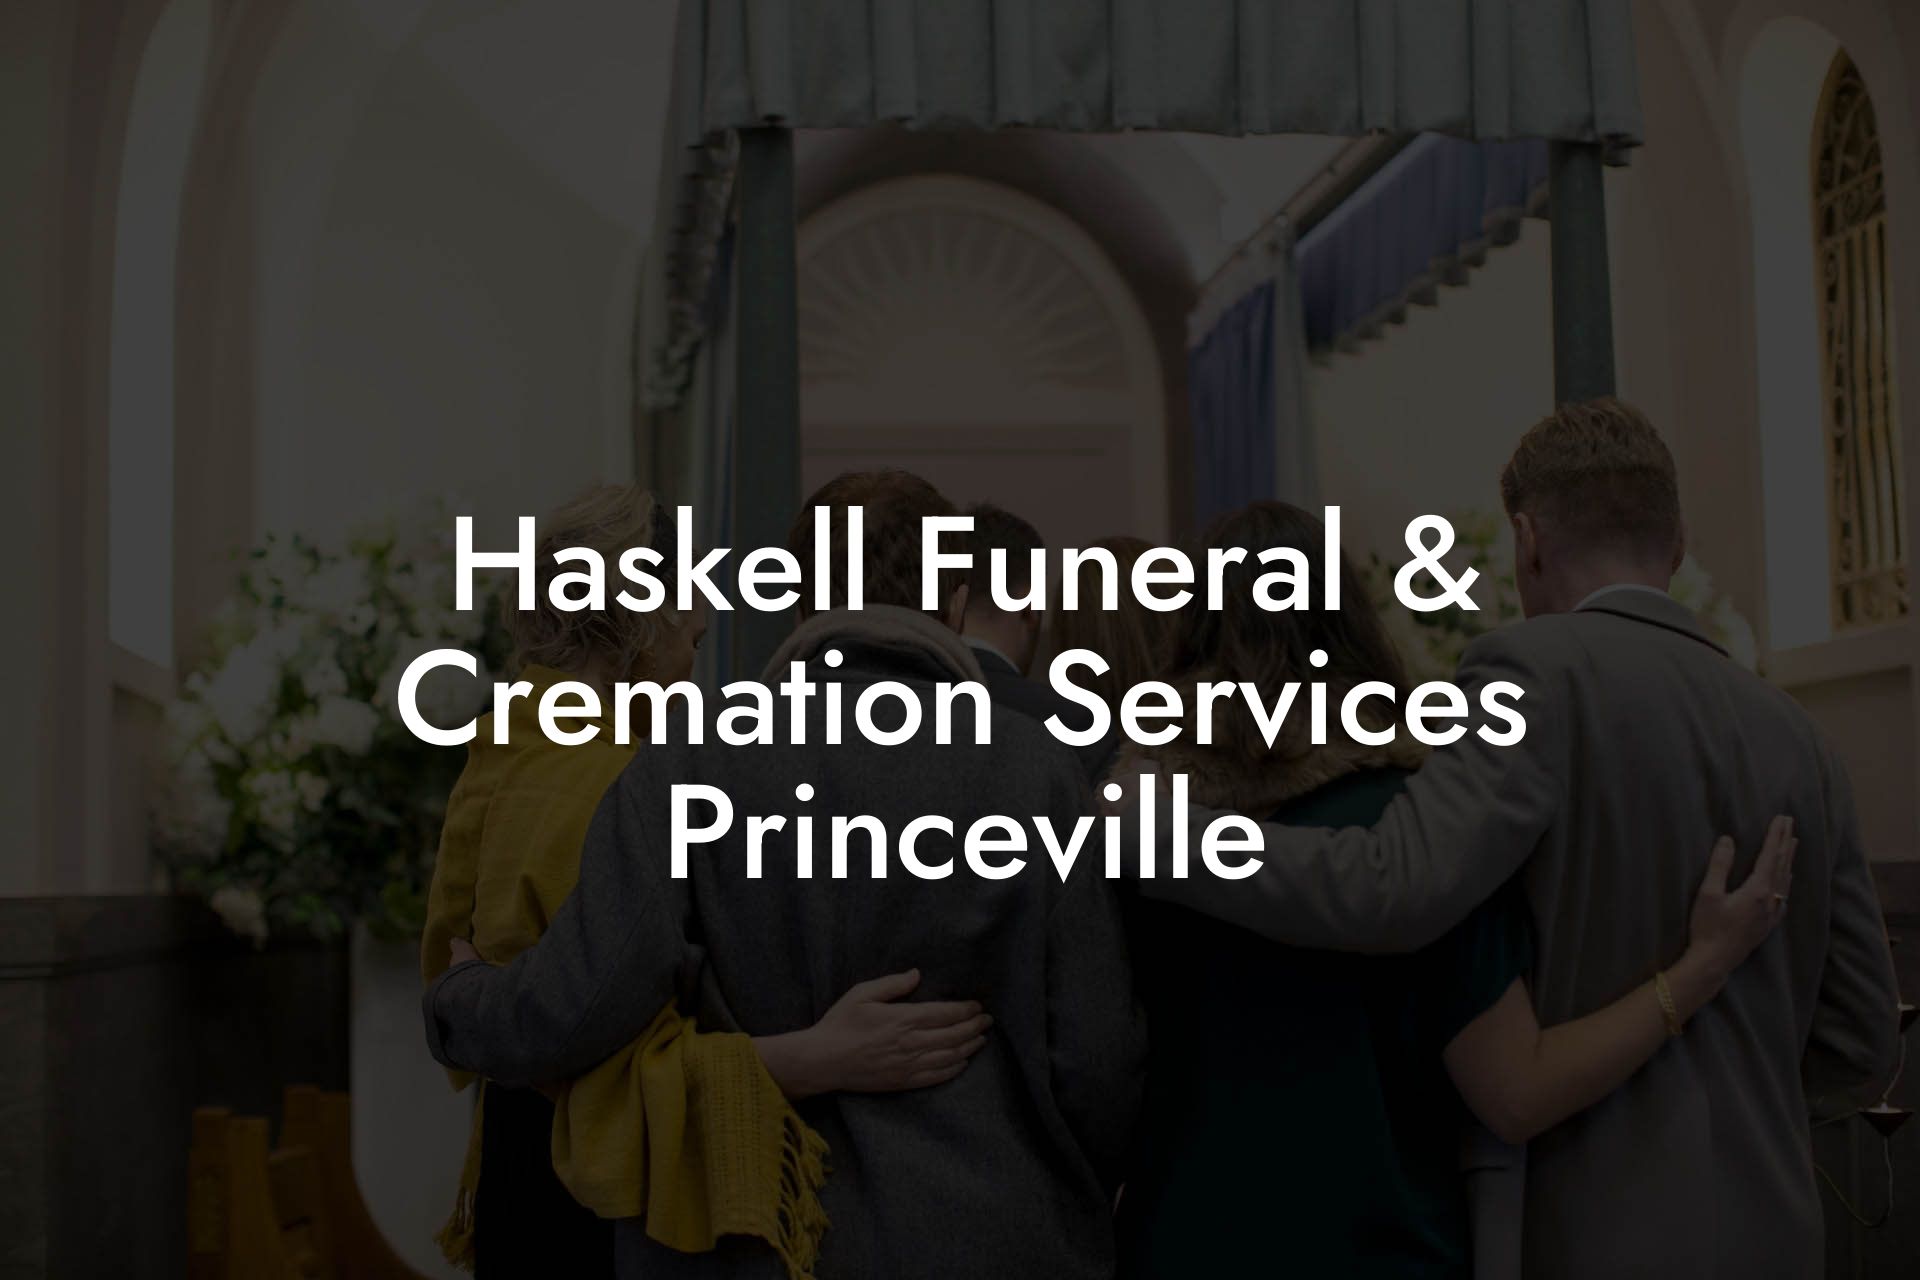 Haskell Funeral & Cremation Services Princeville